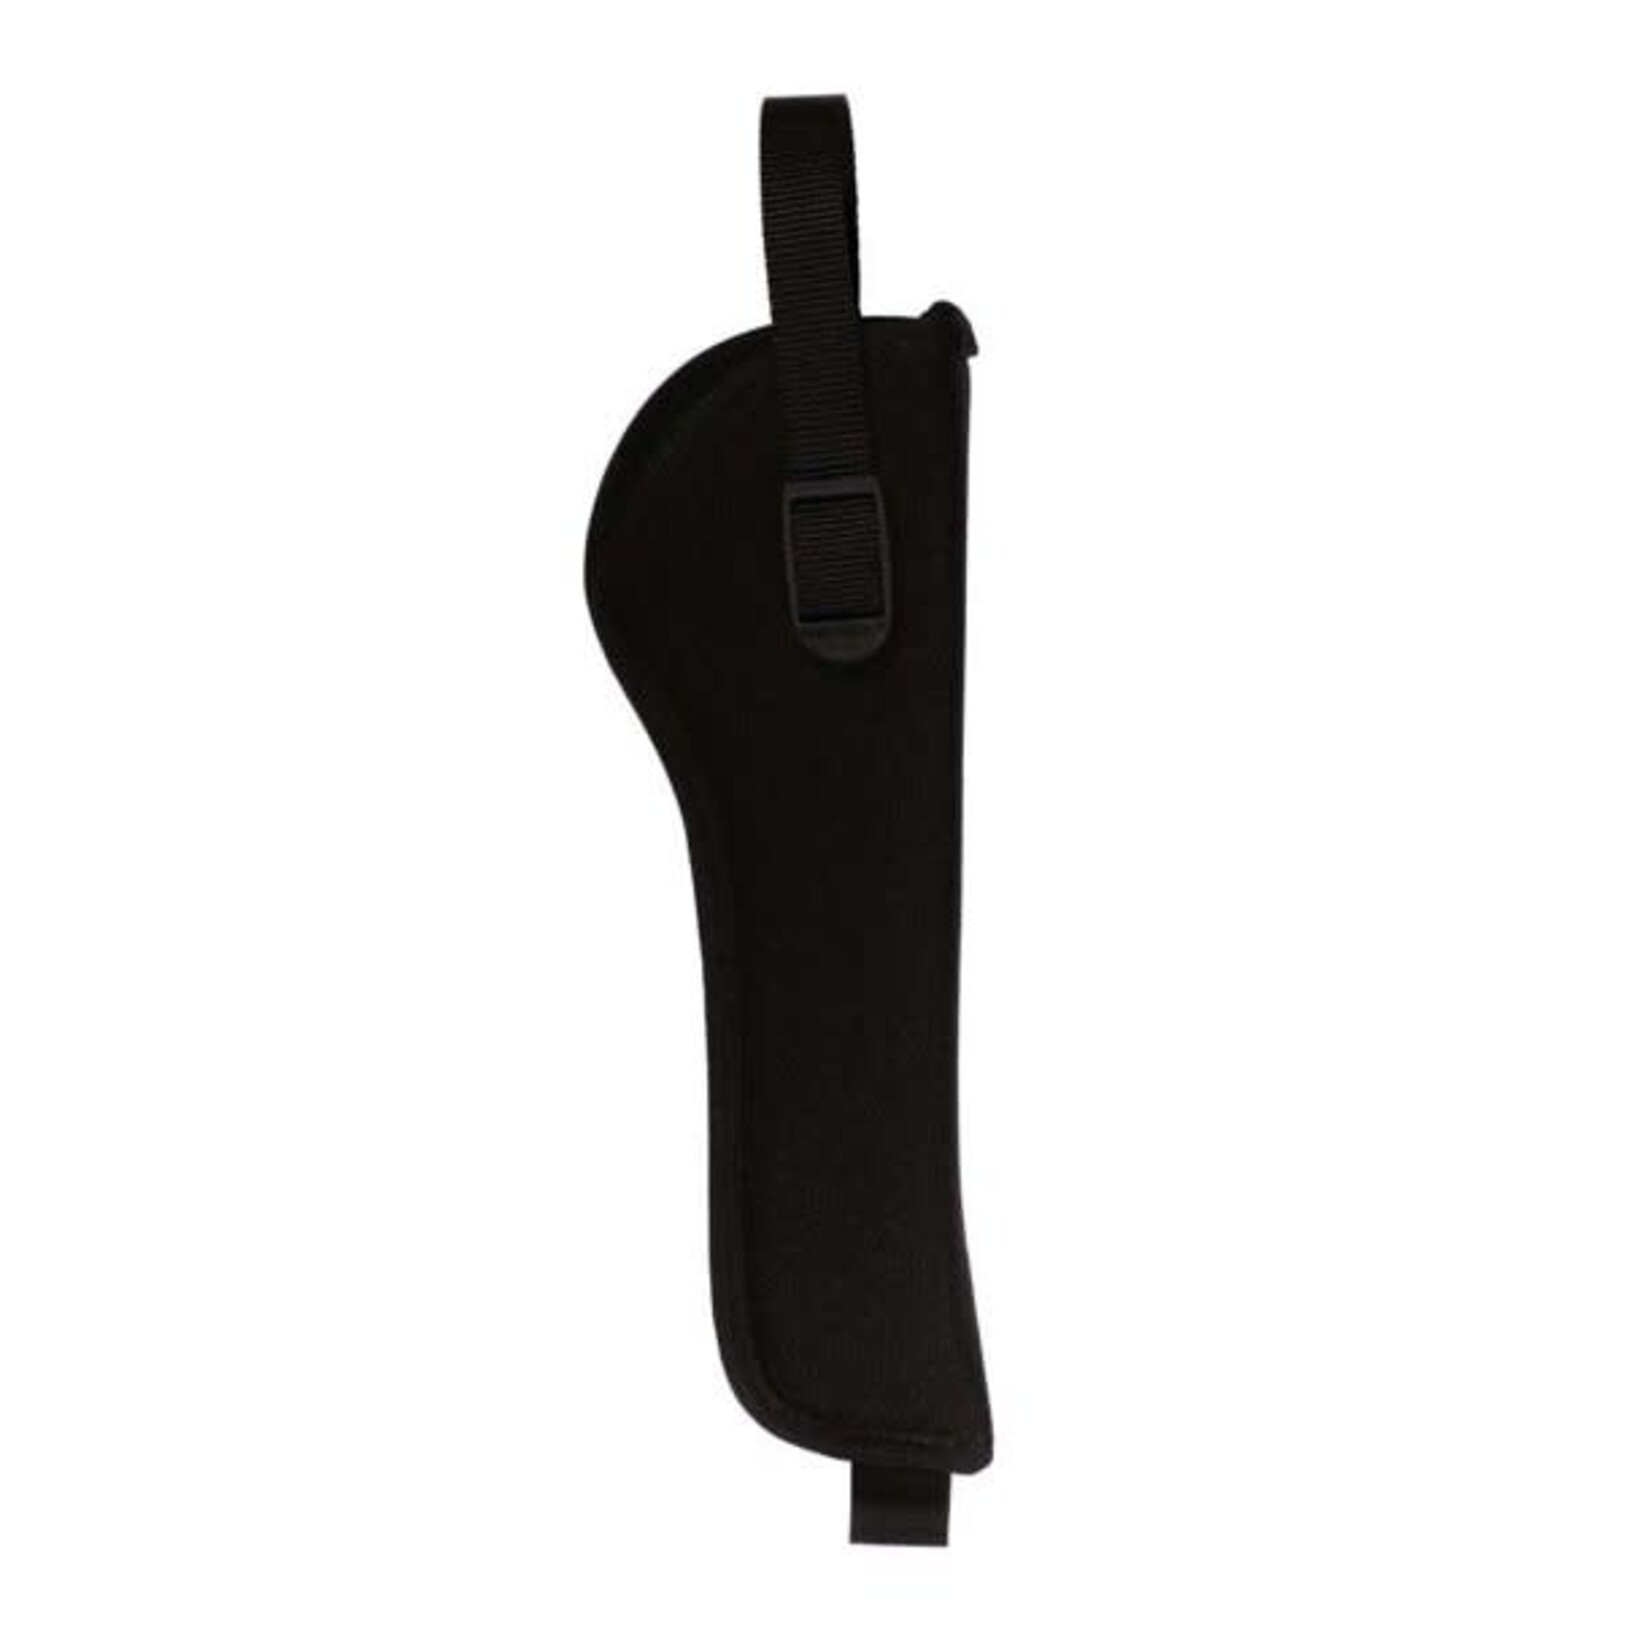 UNCLE MIKE'S Hip Holster # 8104-2